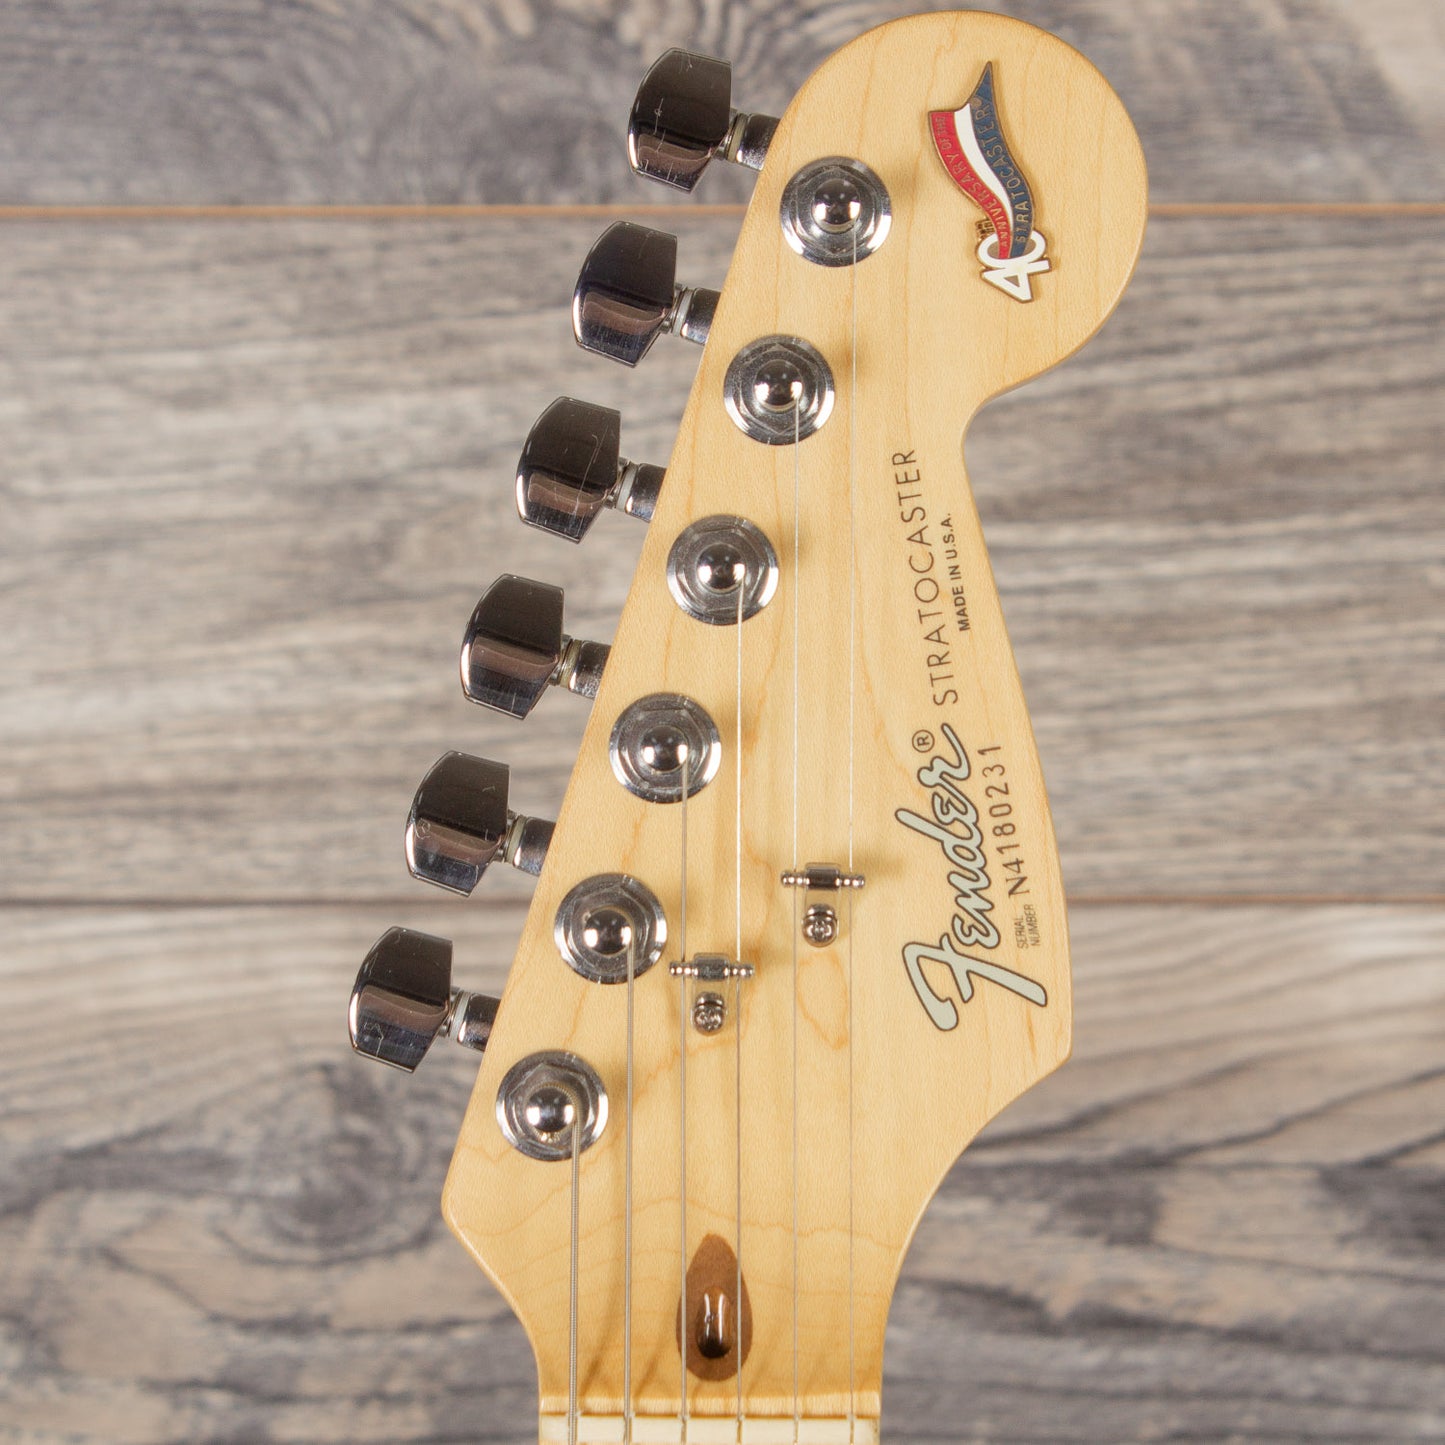 1994 Fender American Standard Stratocaster with Aluminum body